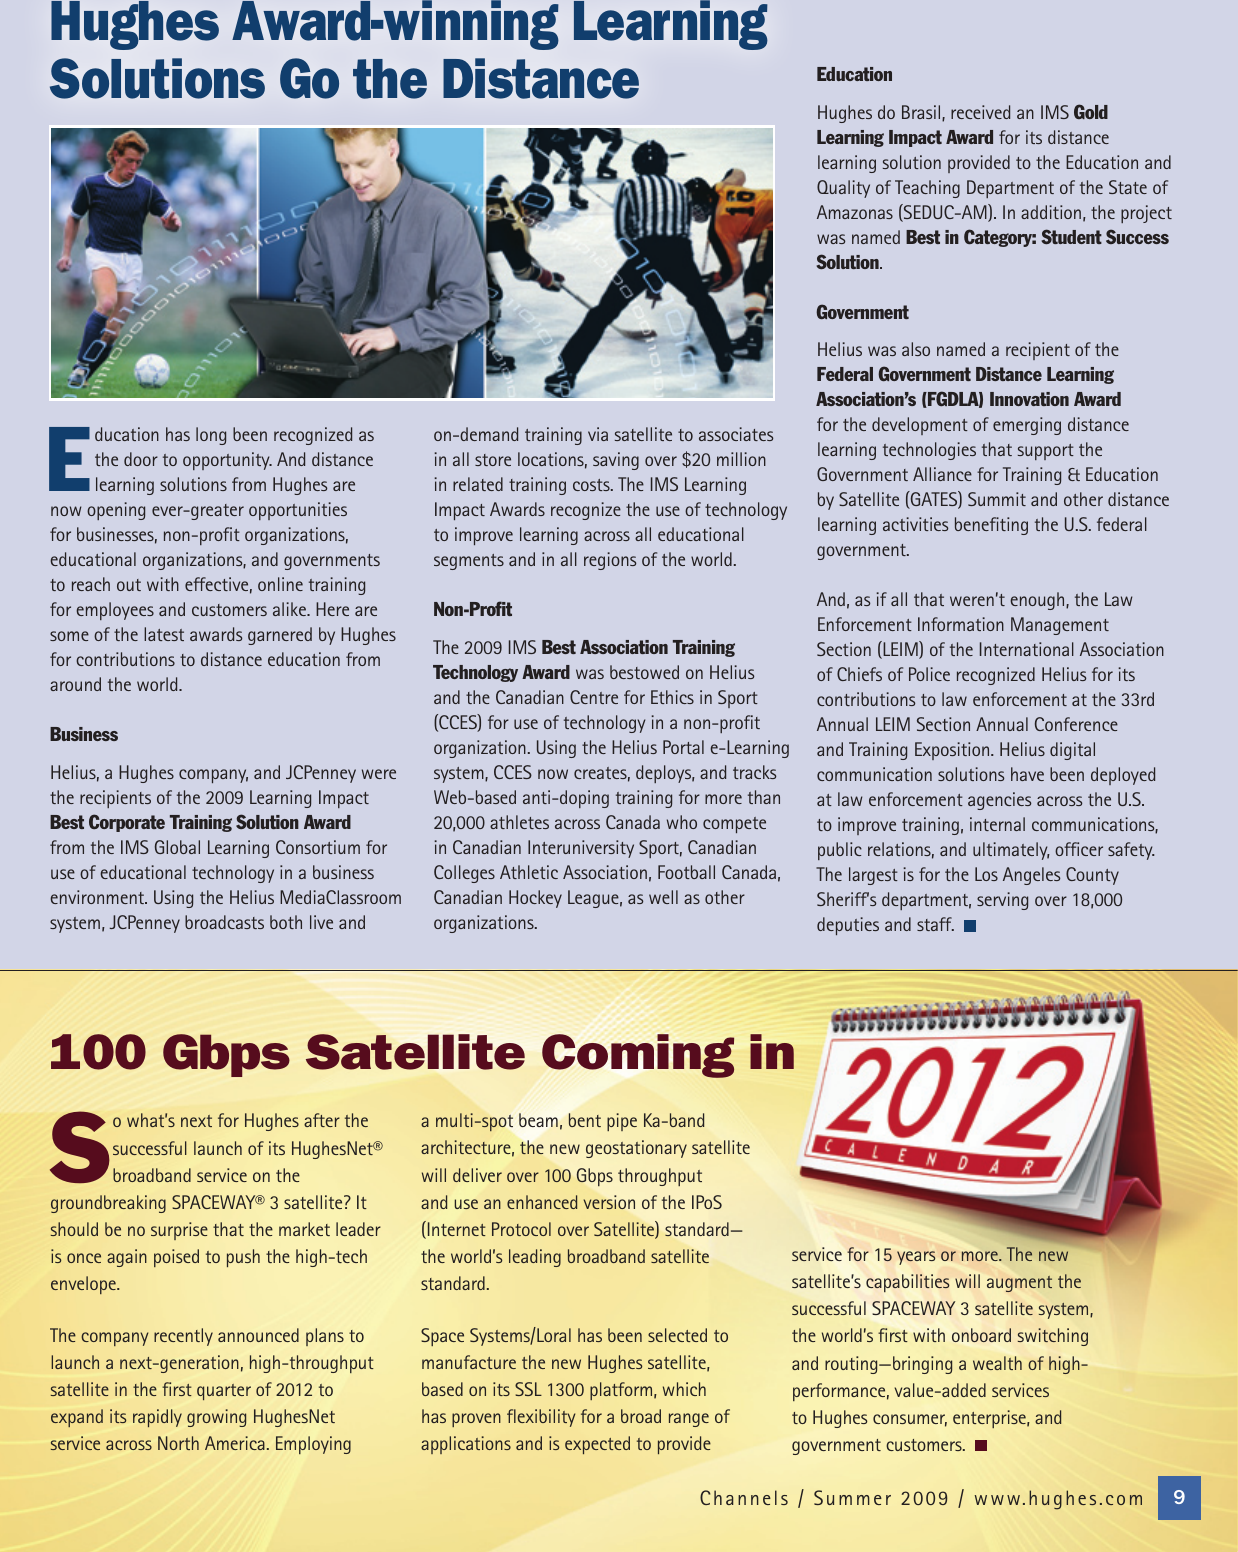 Page 9 of 12 - Channelssummer 2009